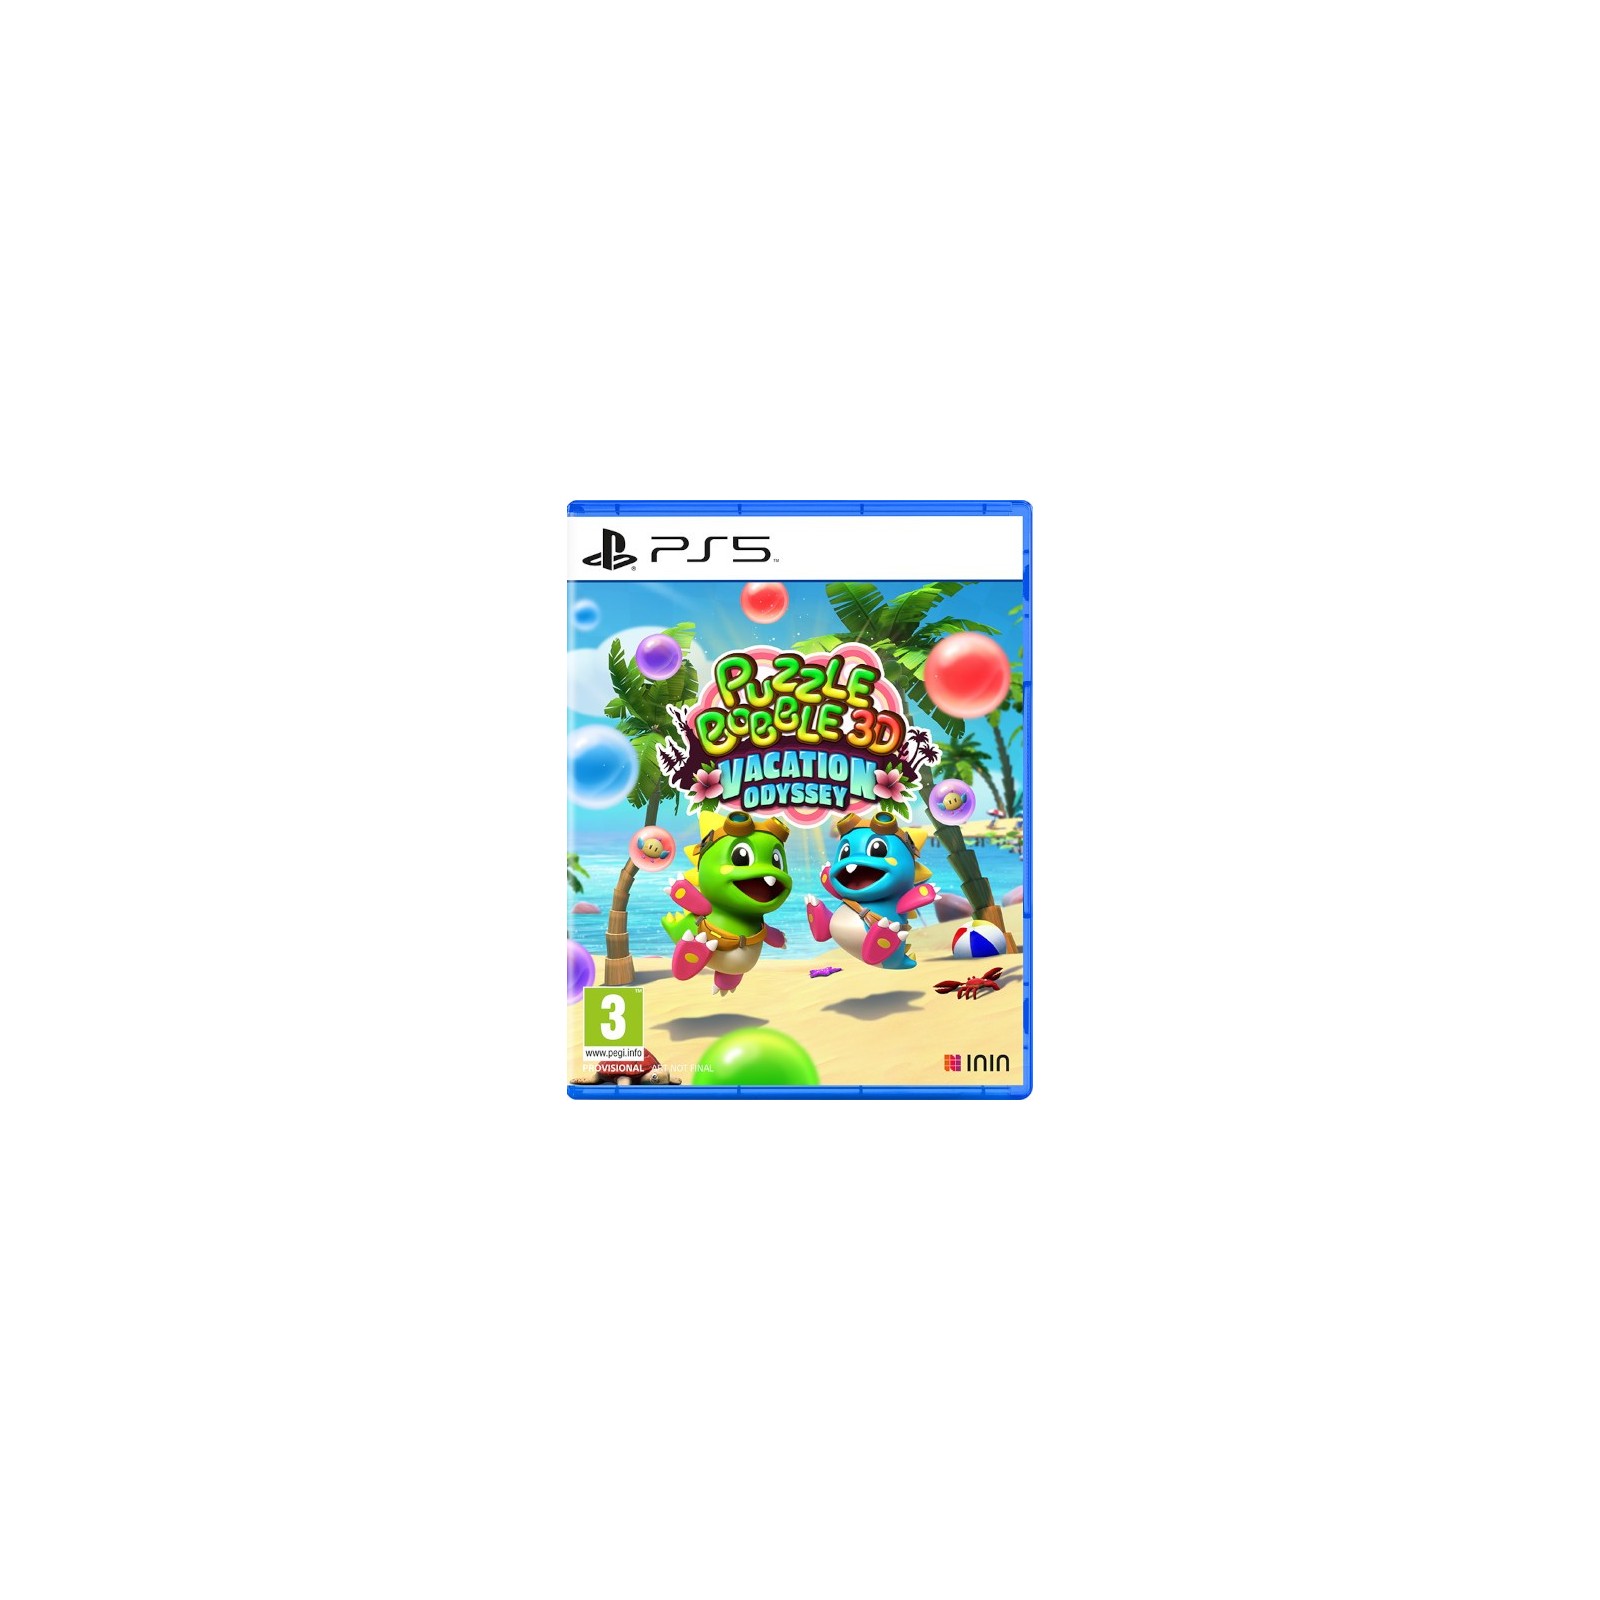 PUZZLE BOBBLE 3D: VACATION ODYSSEY